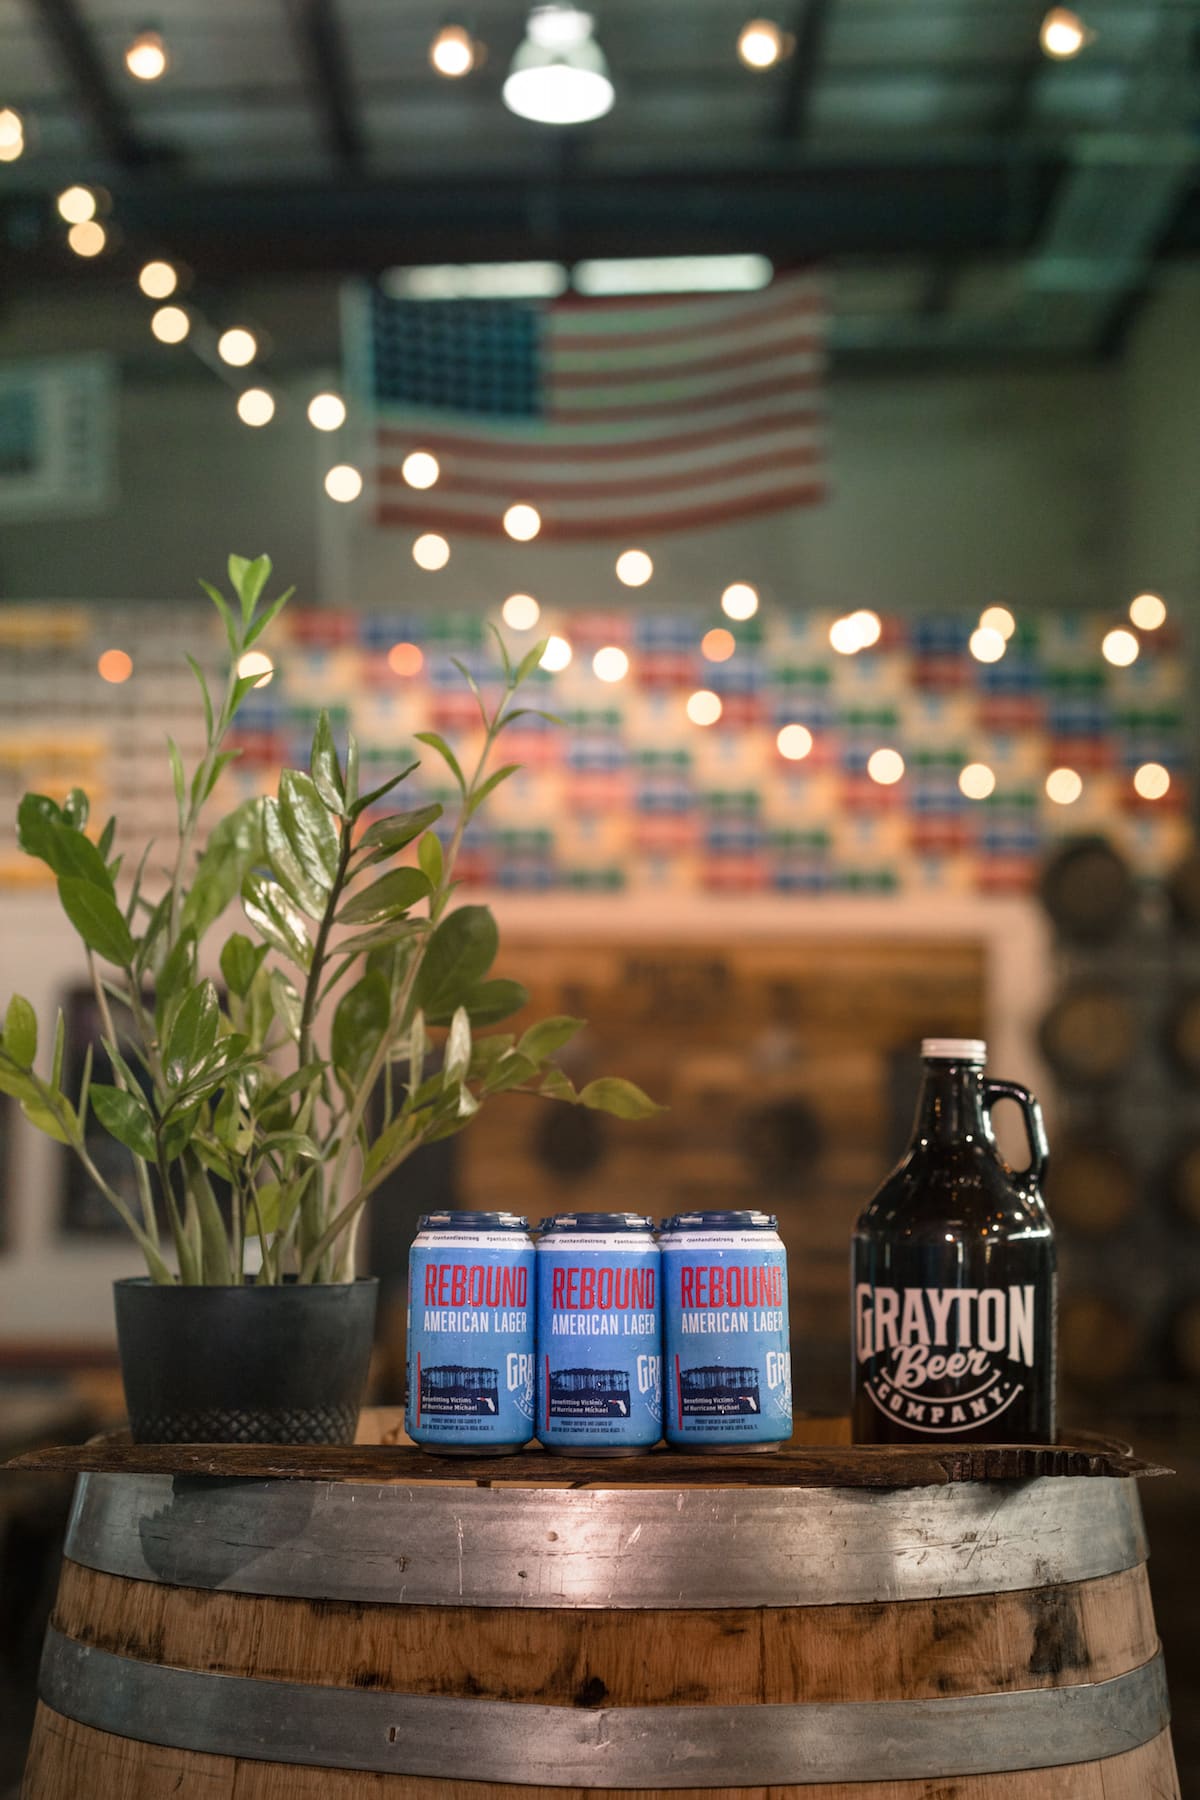 Rebound American Lager by Grayton Beer Company Fundraiser for Hurricane Michael Relief